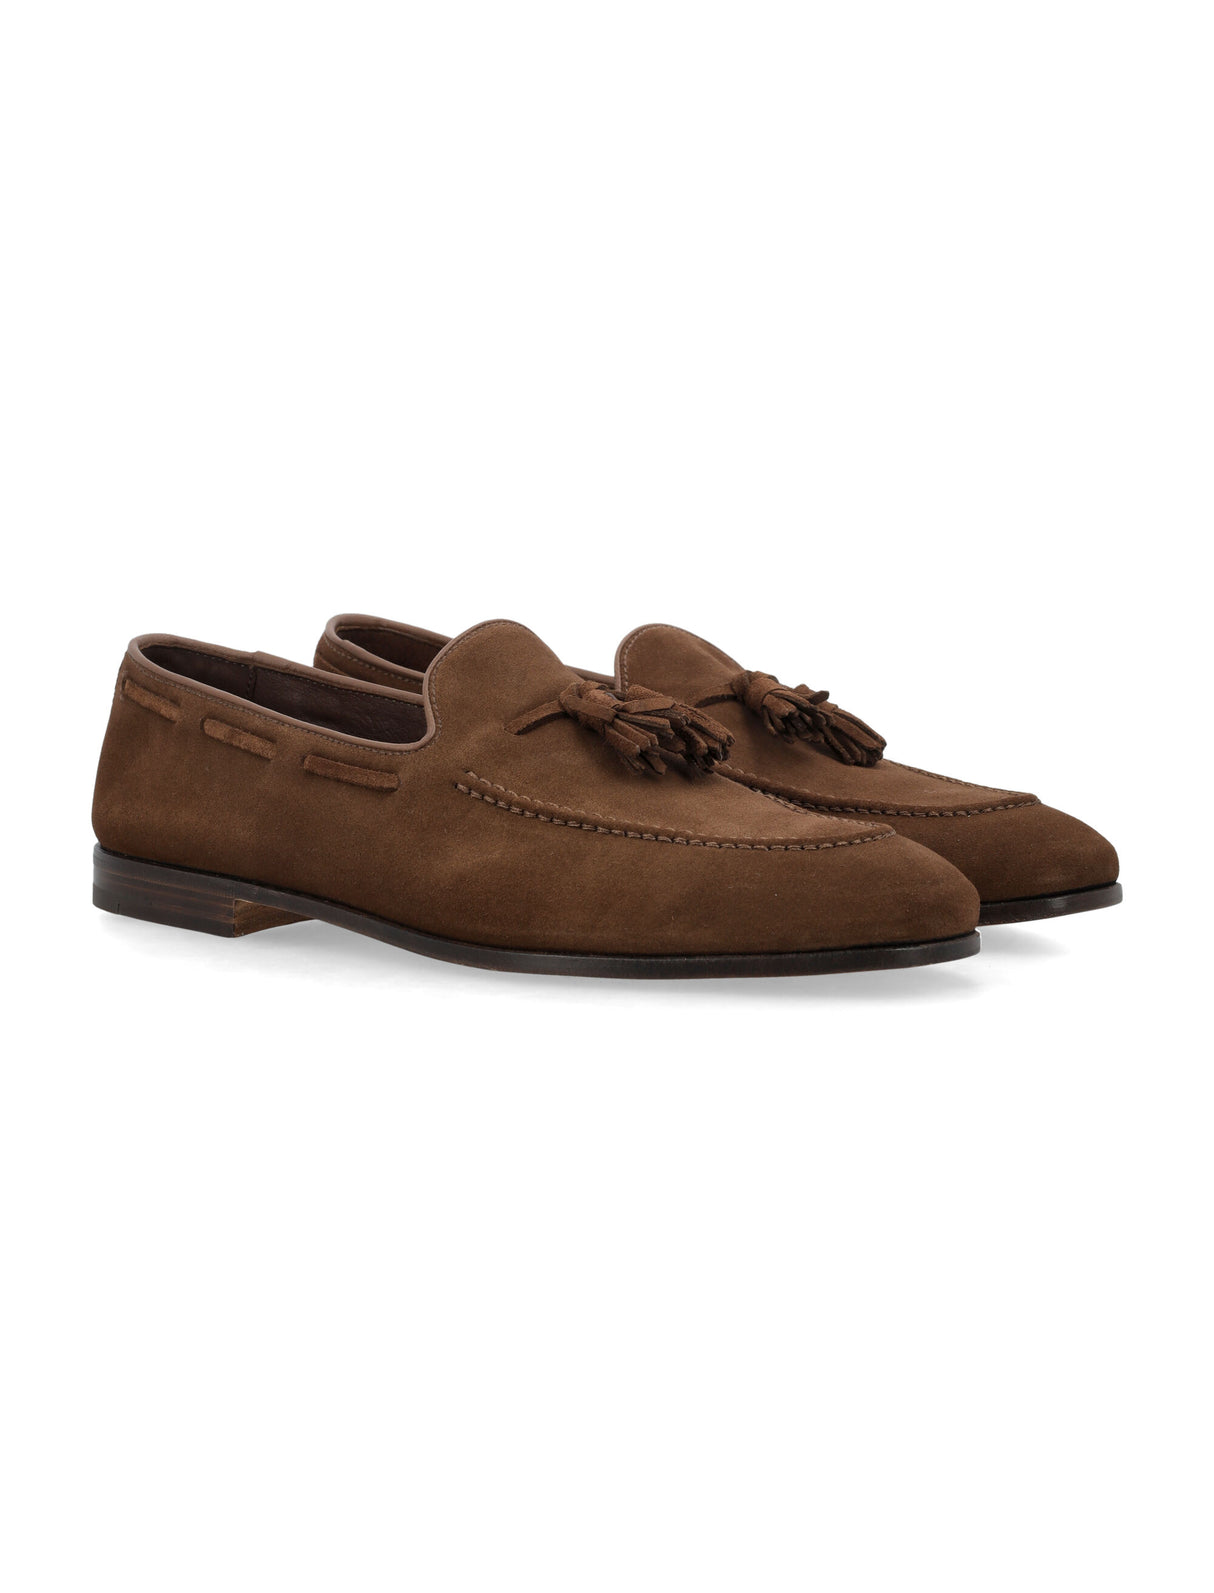 CHURCH'S Burnt Brown Suede Tassel Loafers for Men